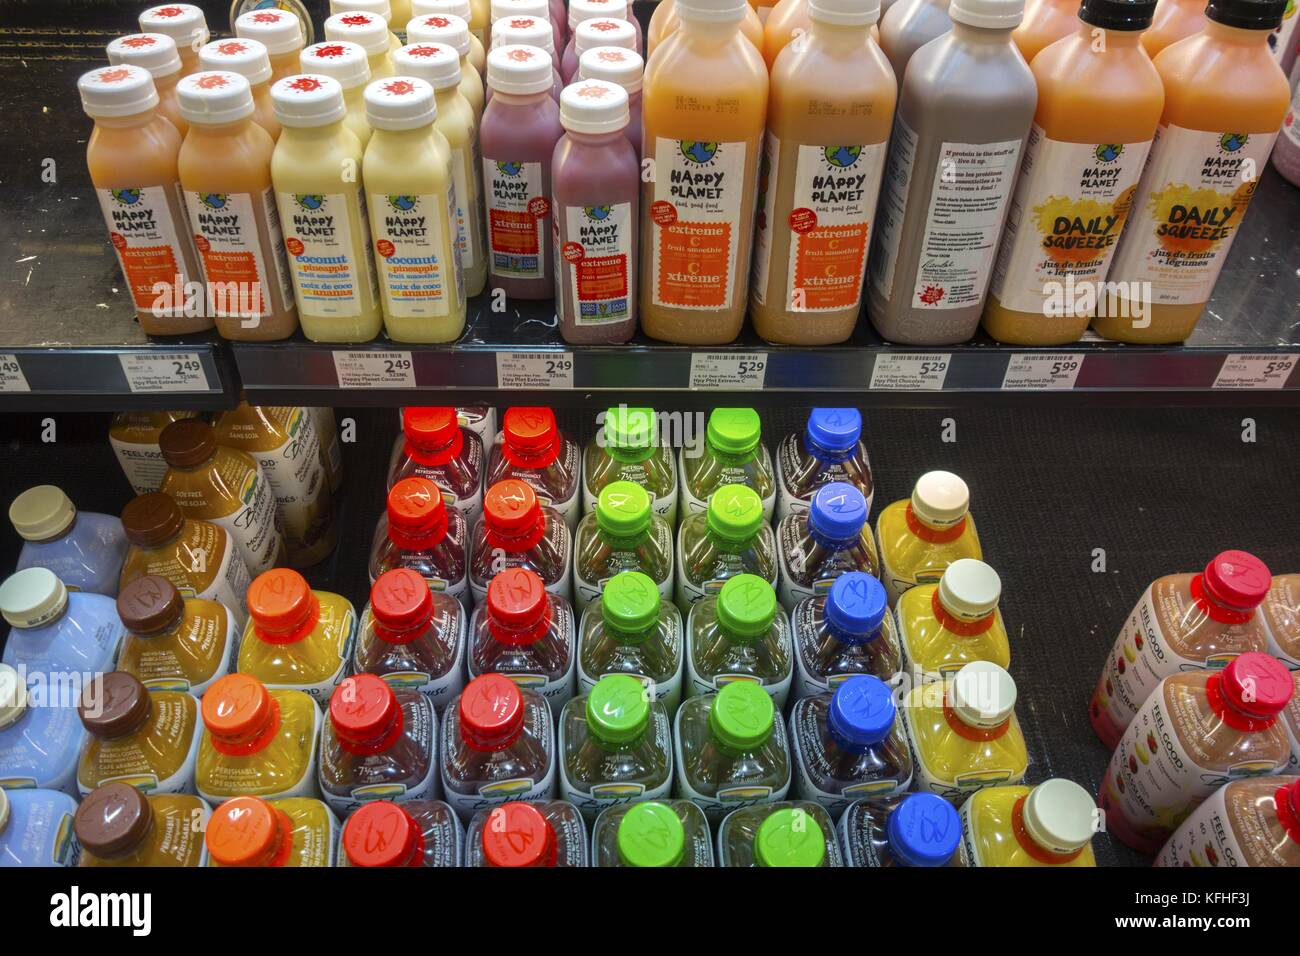 Assortment of Happy Planet Bottled Juices on Sale in Save on Foods Grocery Store Stock Photo